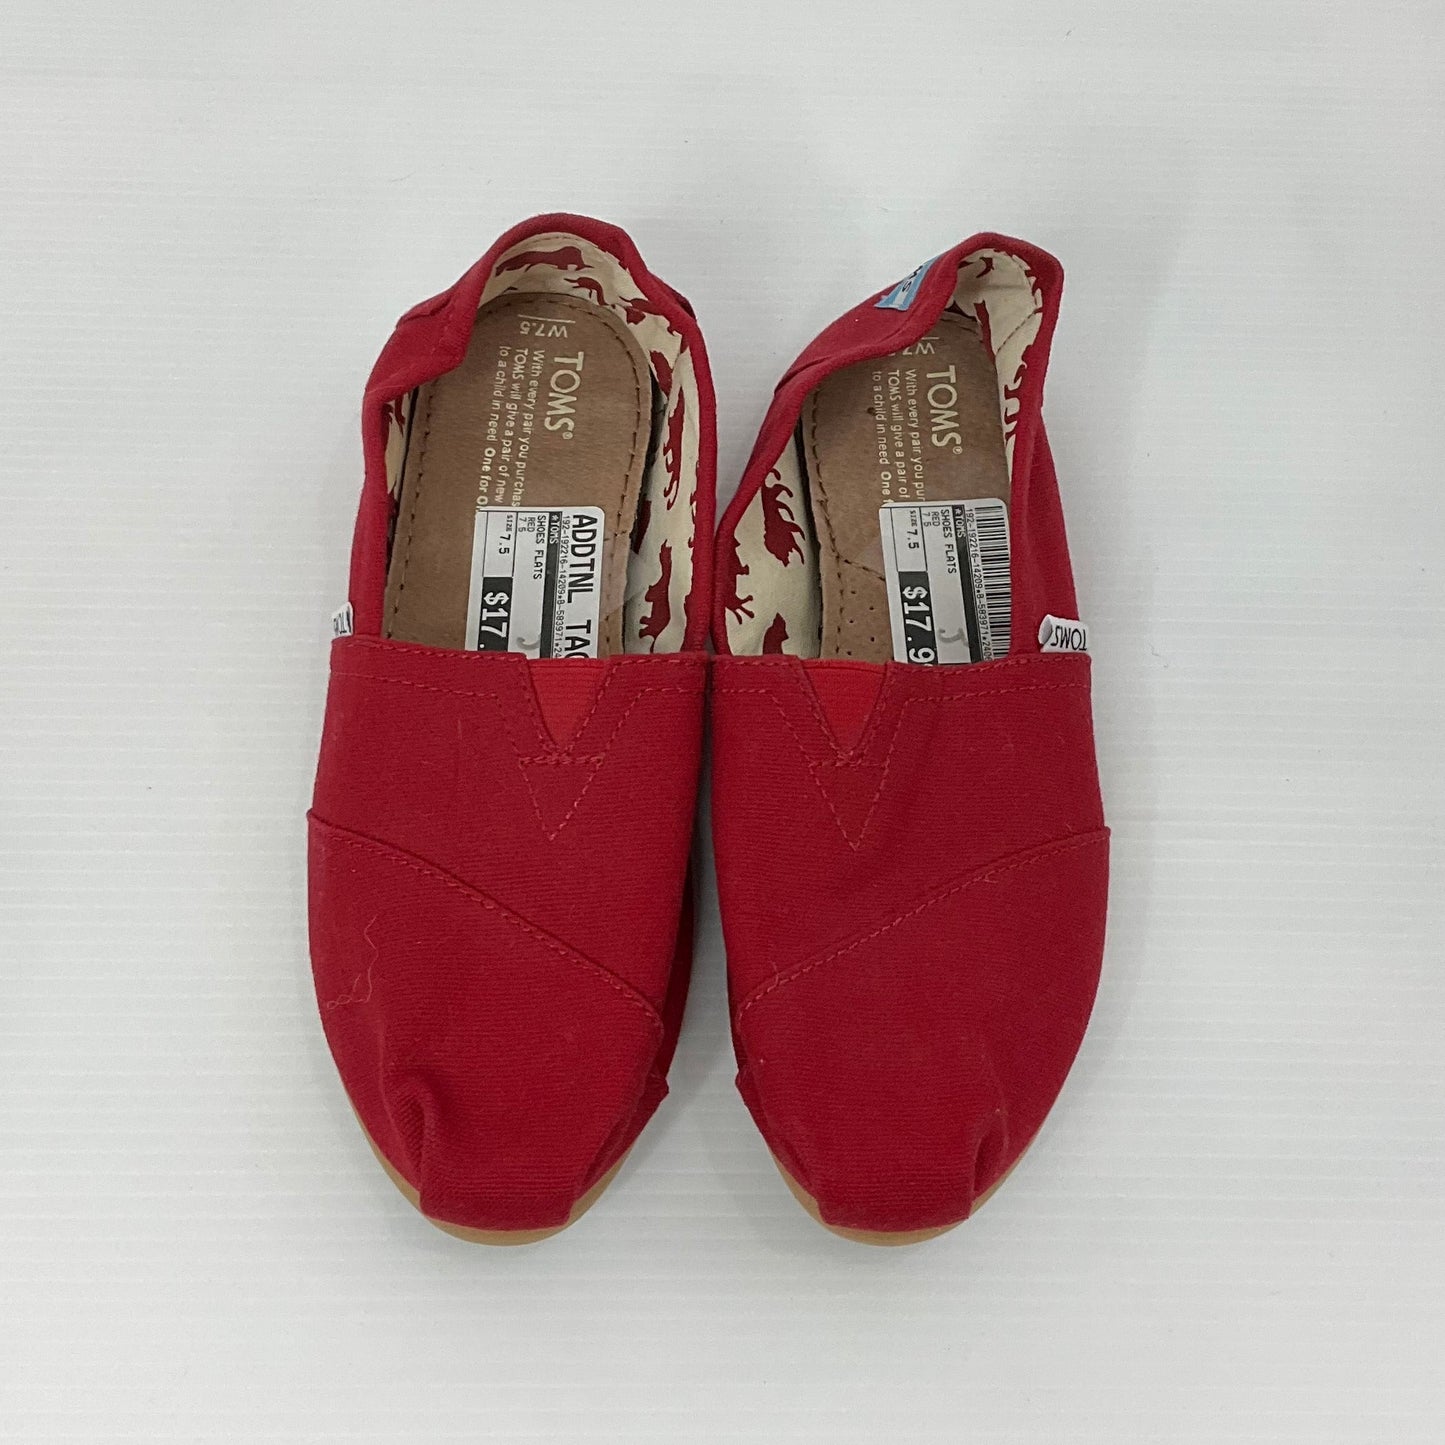 Red Shoes Flats Toms, Size 7.5